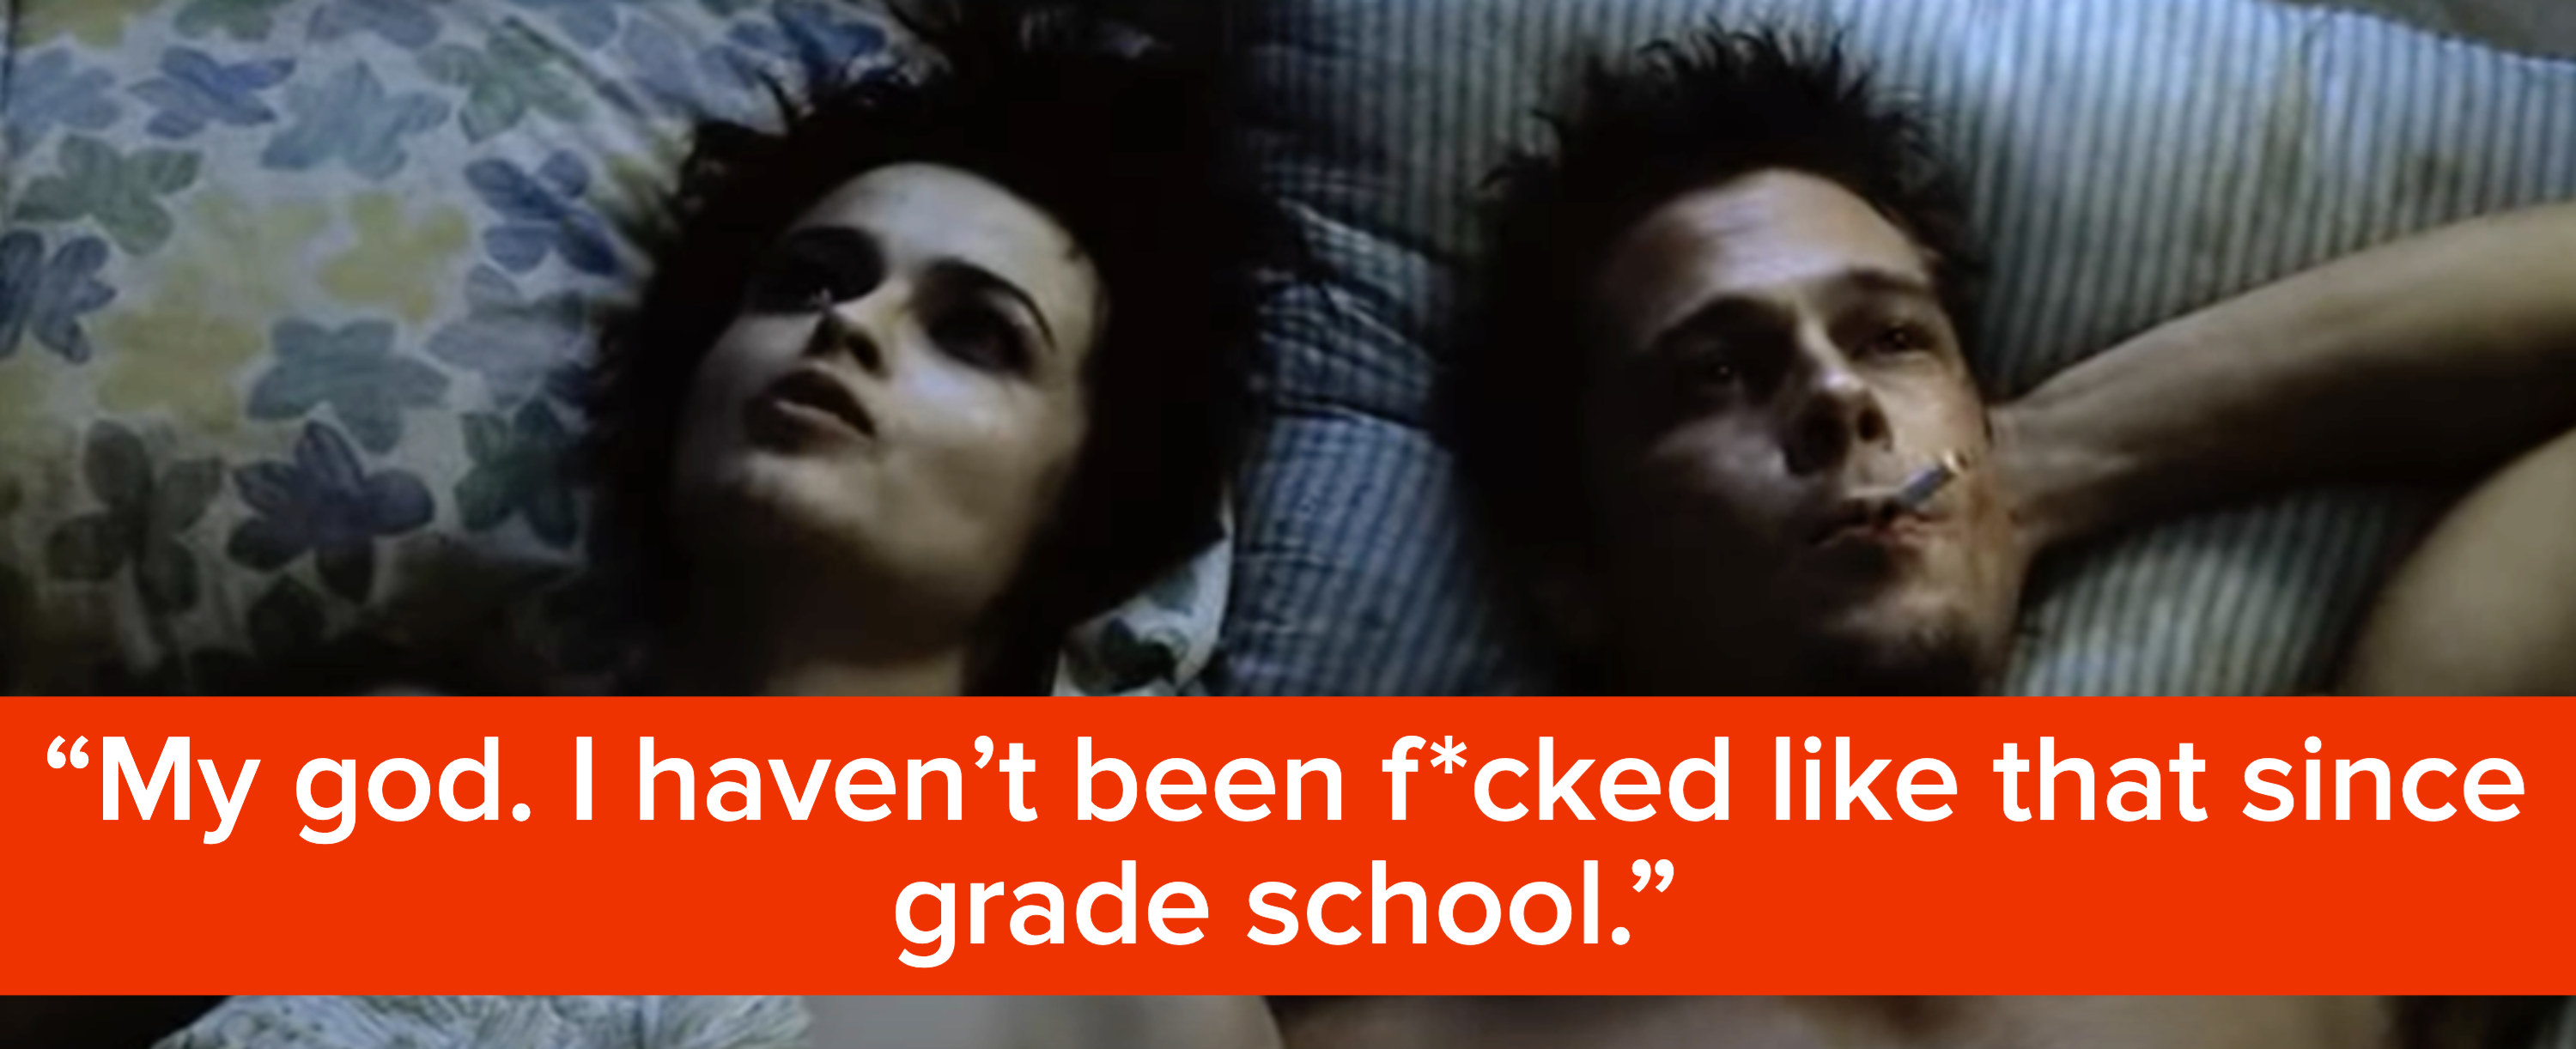 woman in bed says &quot;my god, I haven&#x27;t been fucked like that since grade school&quot;